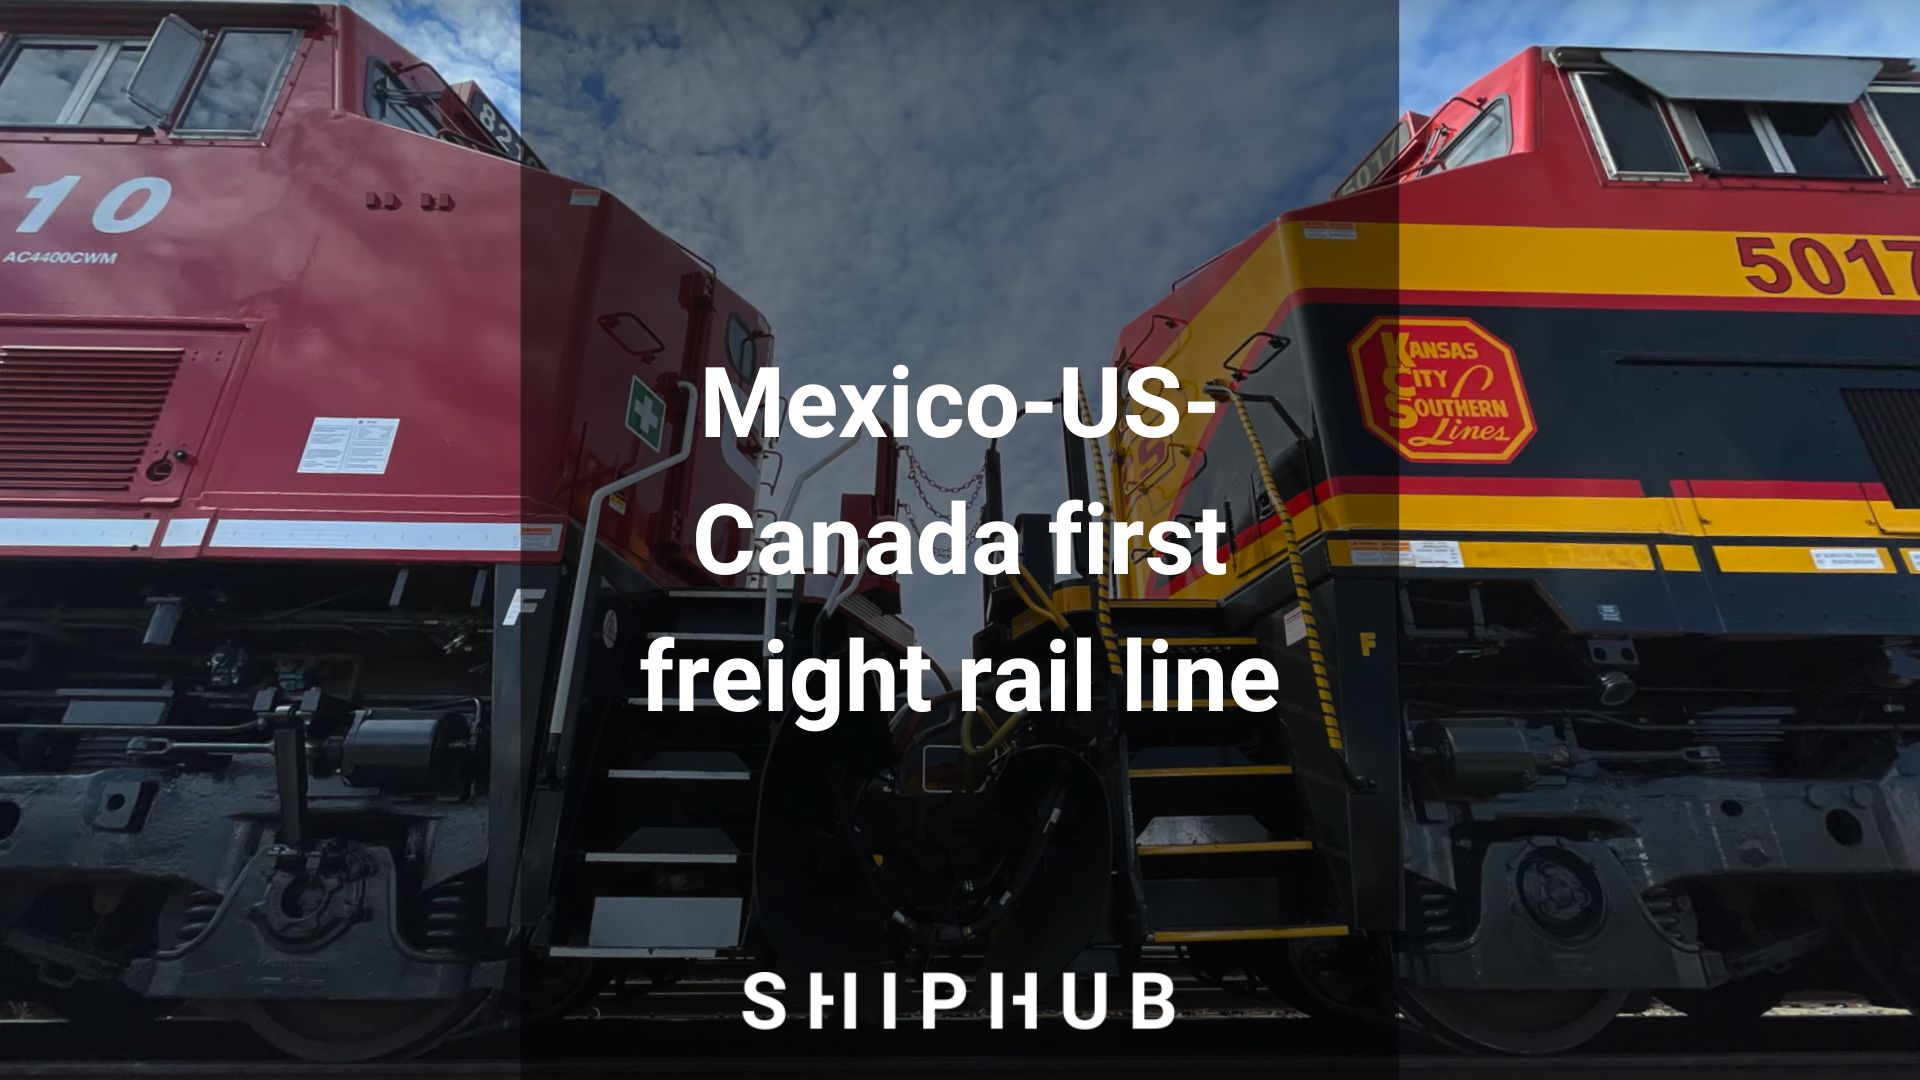 CPKC – the first freight rail line to run through Mexico, the US and Canada